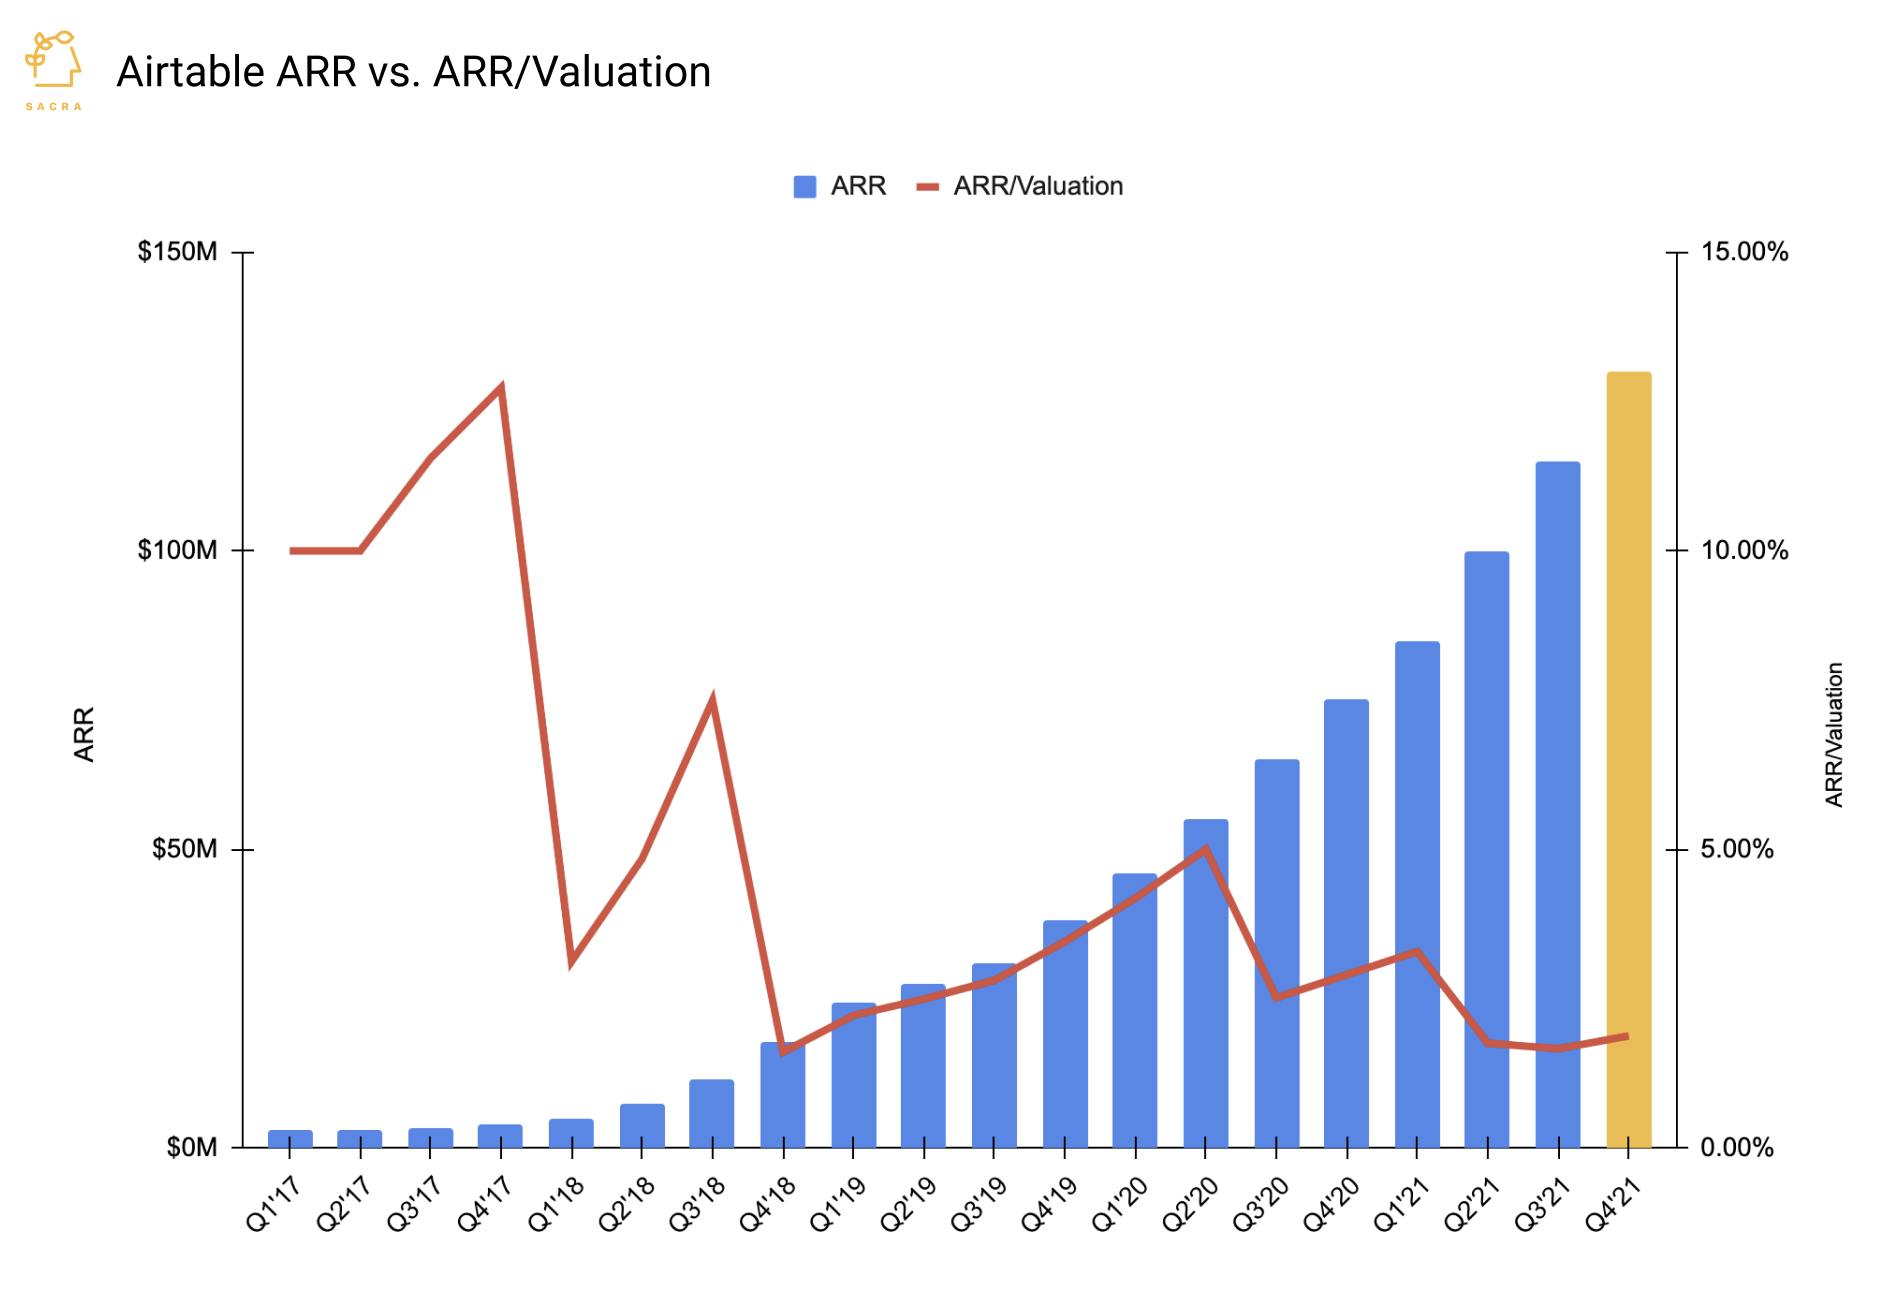 Airtable: The $7.7B Roblox of the Enterprise